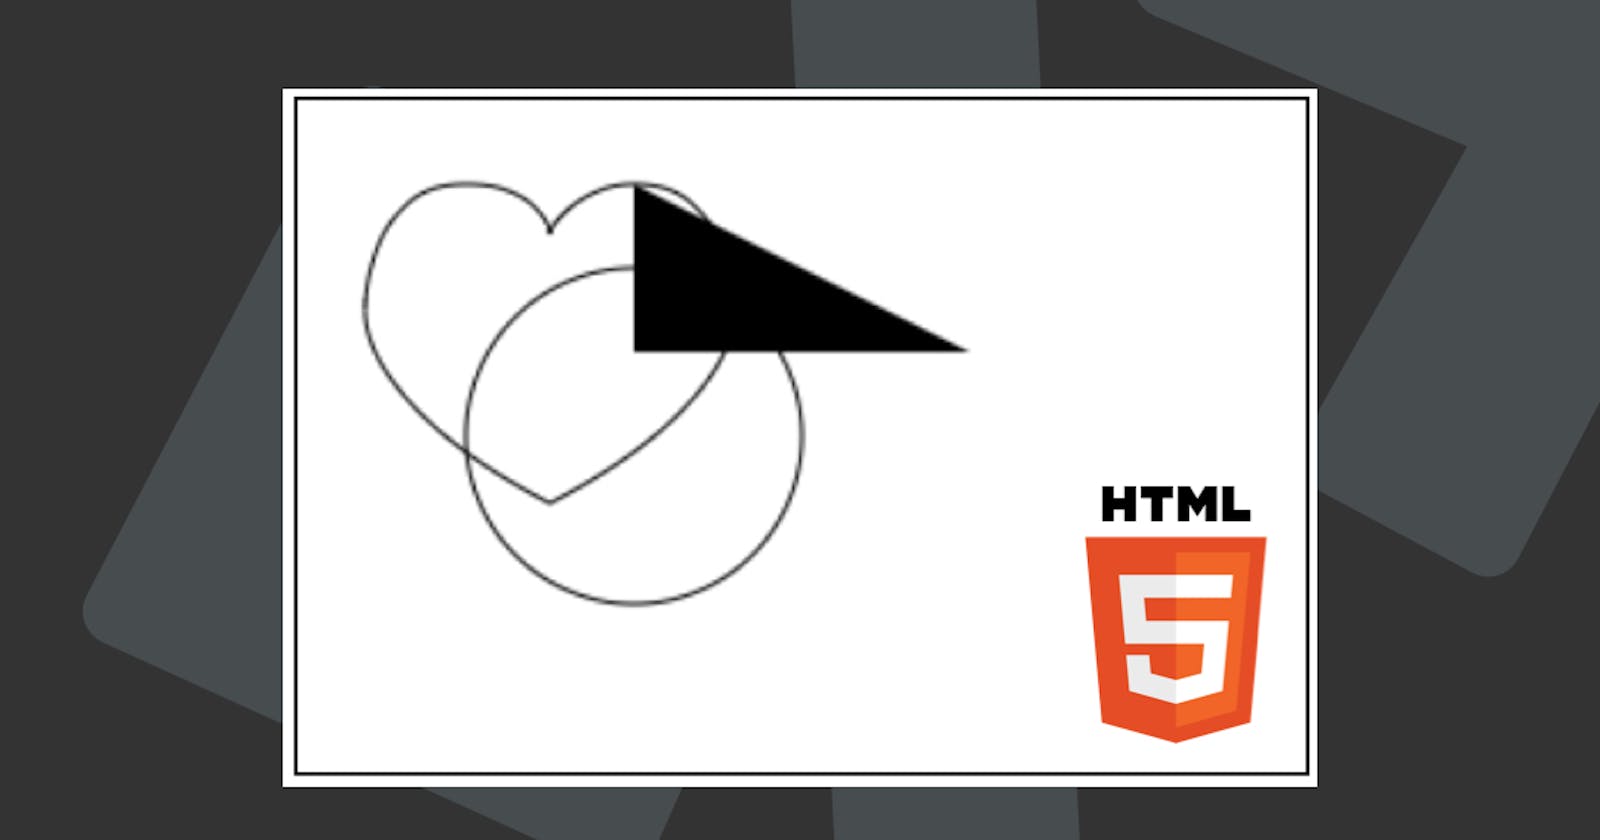 Getting started with the HTML canvas